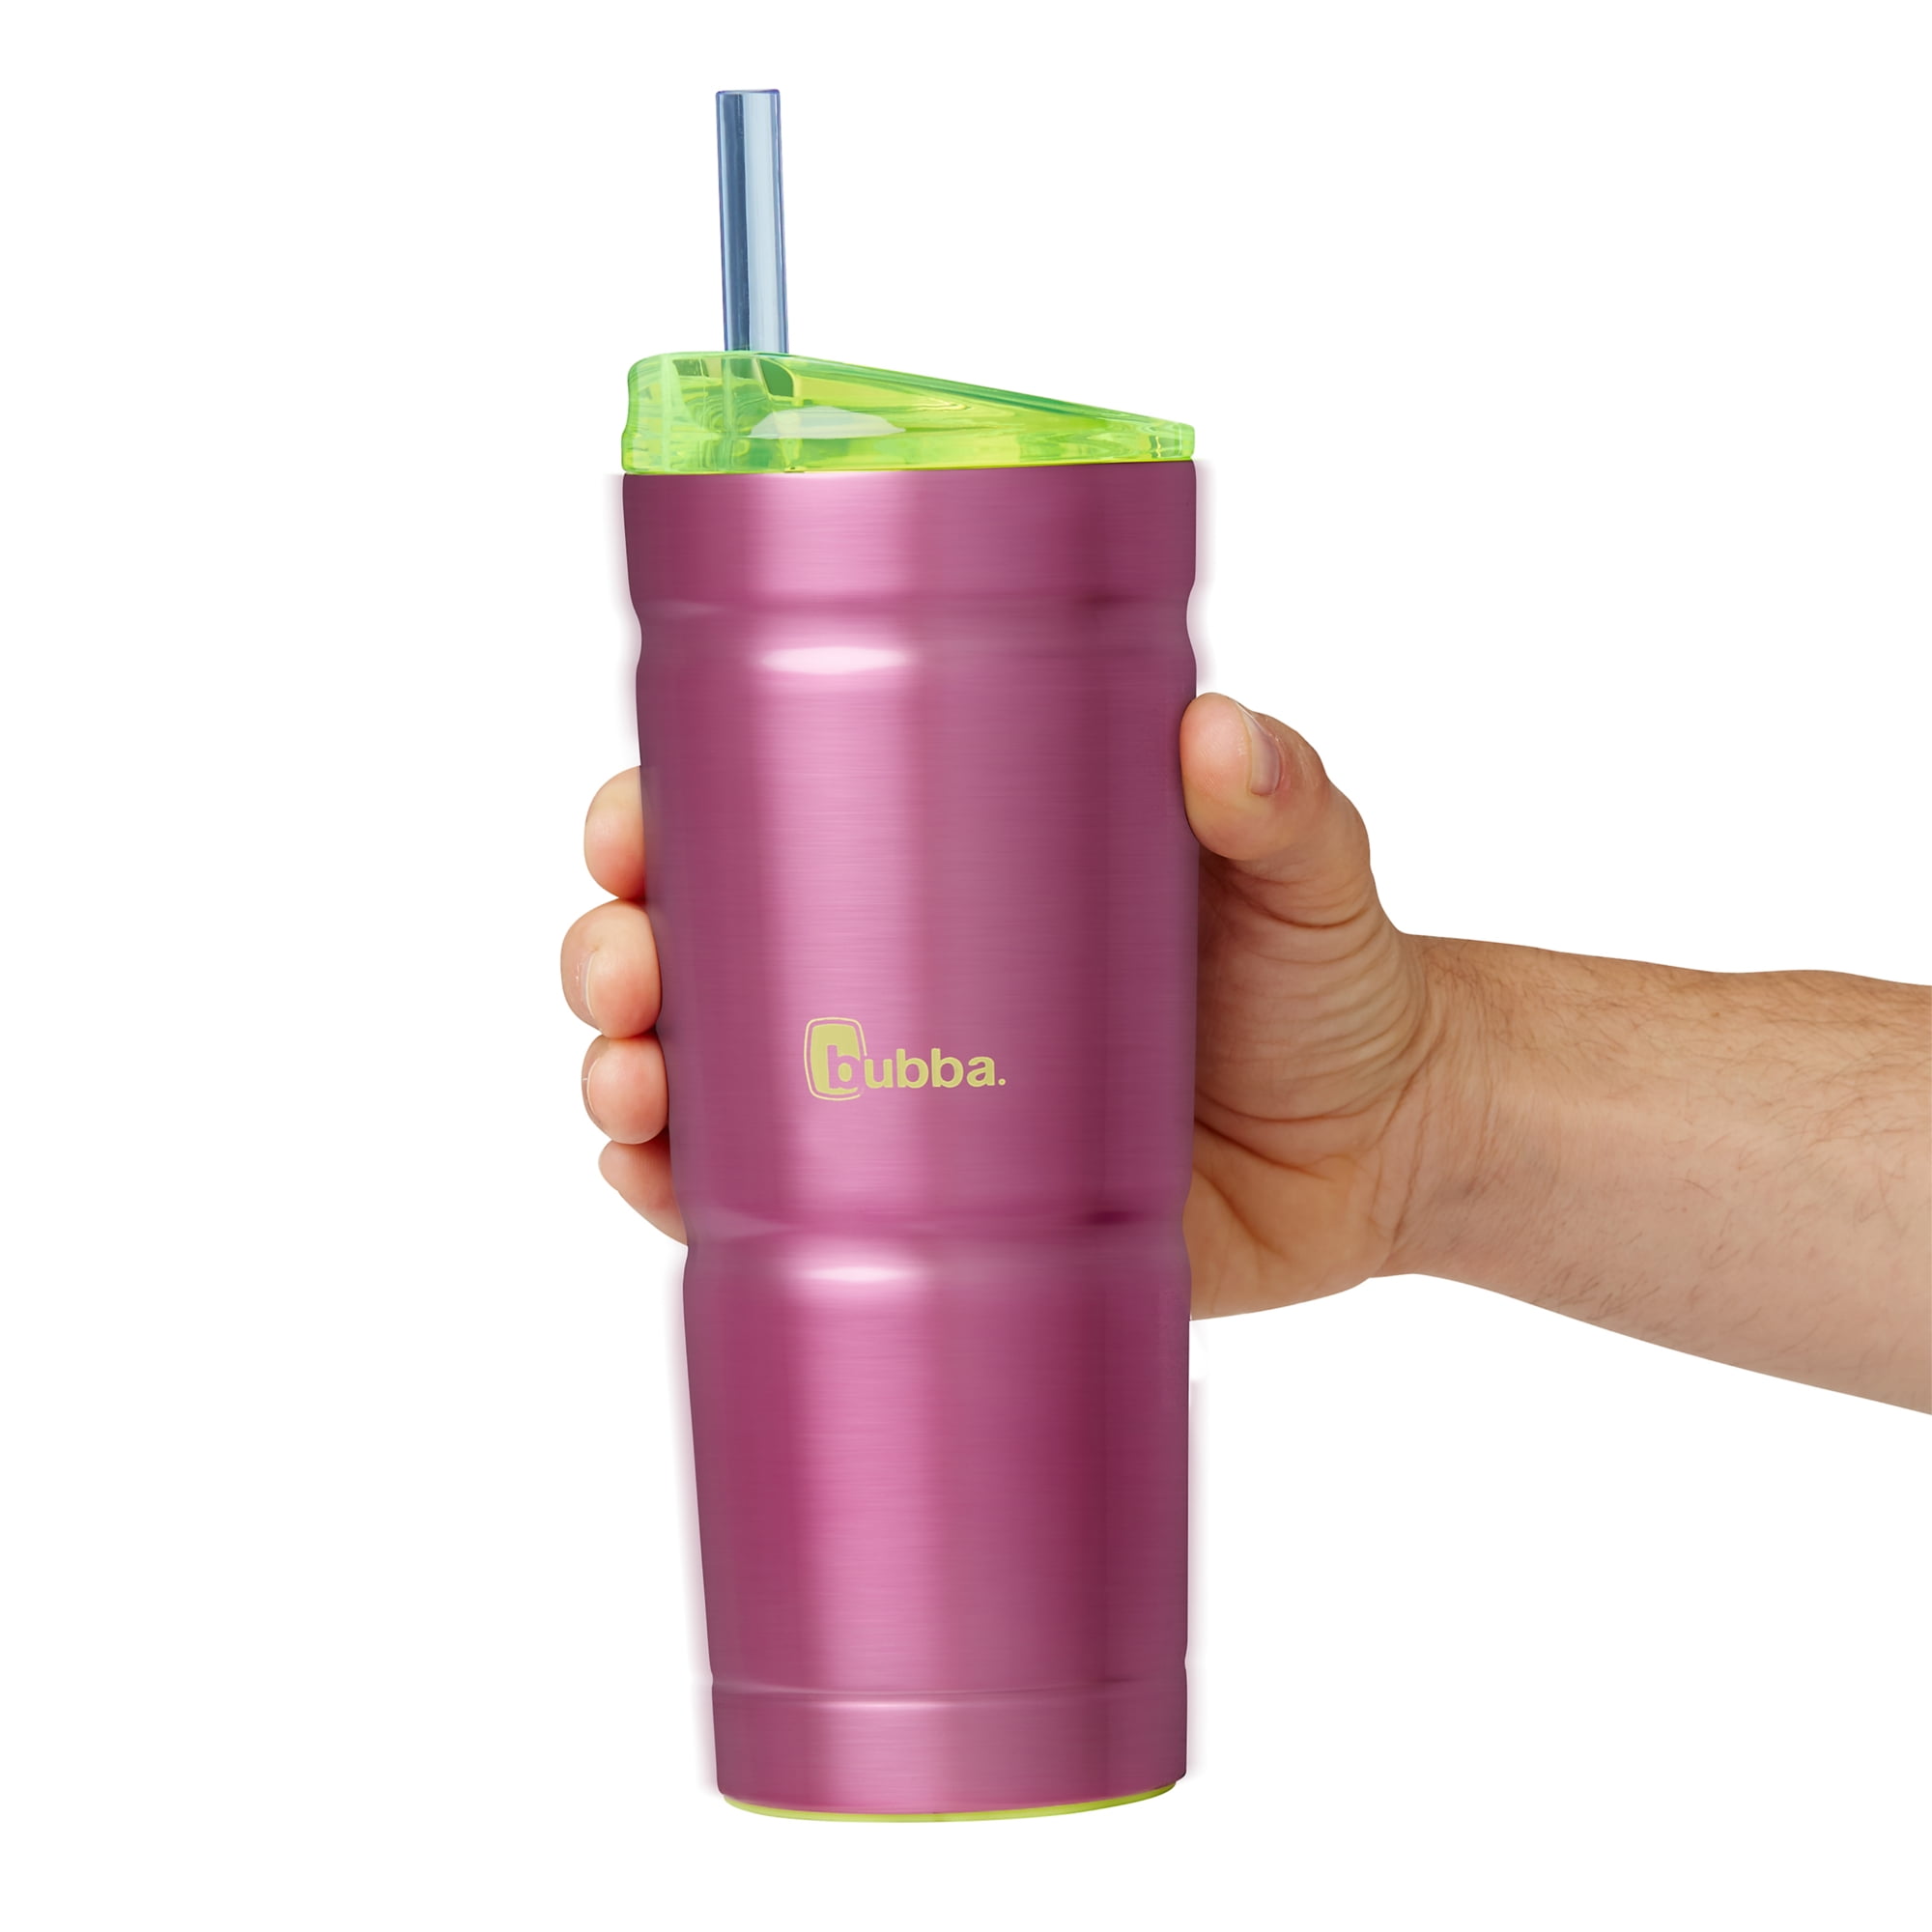 Bubba Envy S Stainless Steel Tumbler with Straw and Bumper Iridescent Pink Sorbet, 24 fl oz., Size: 24oz